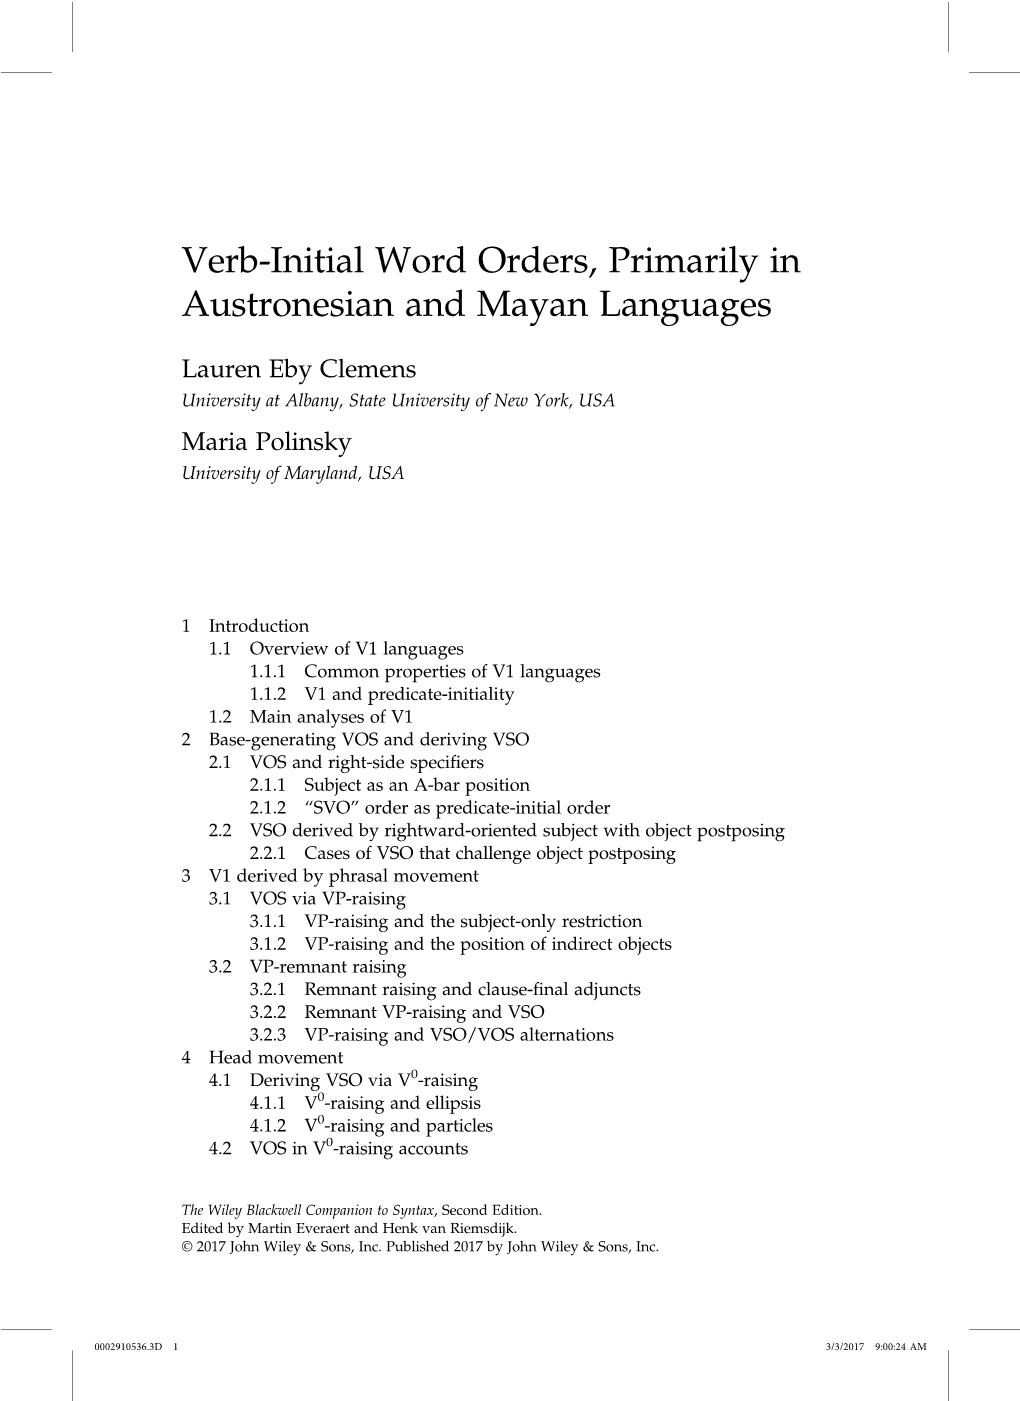 Verb-Initial Word Orders, Primarily in Austronesian and Mayan Languages